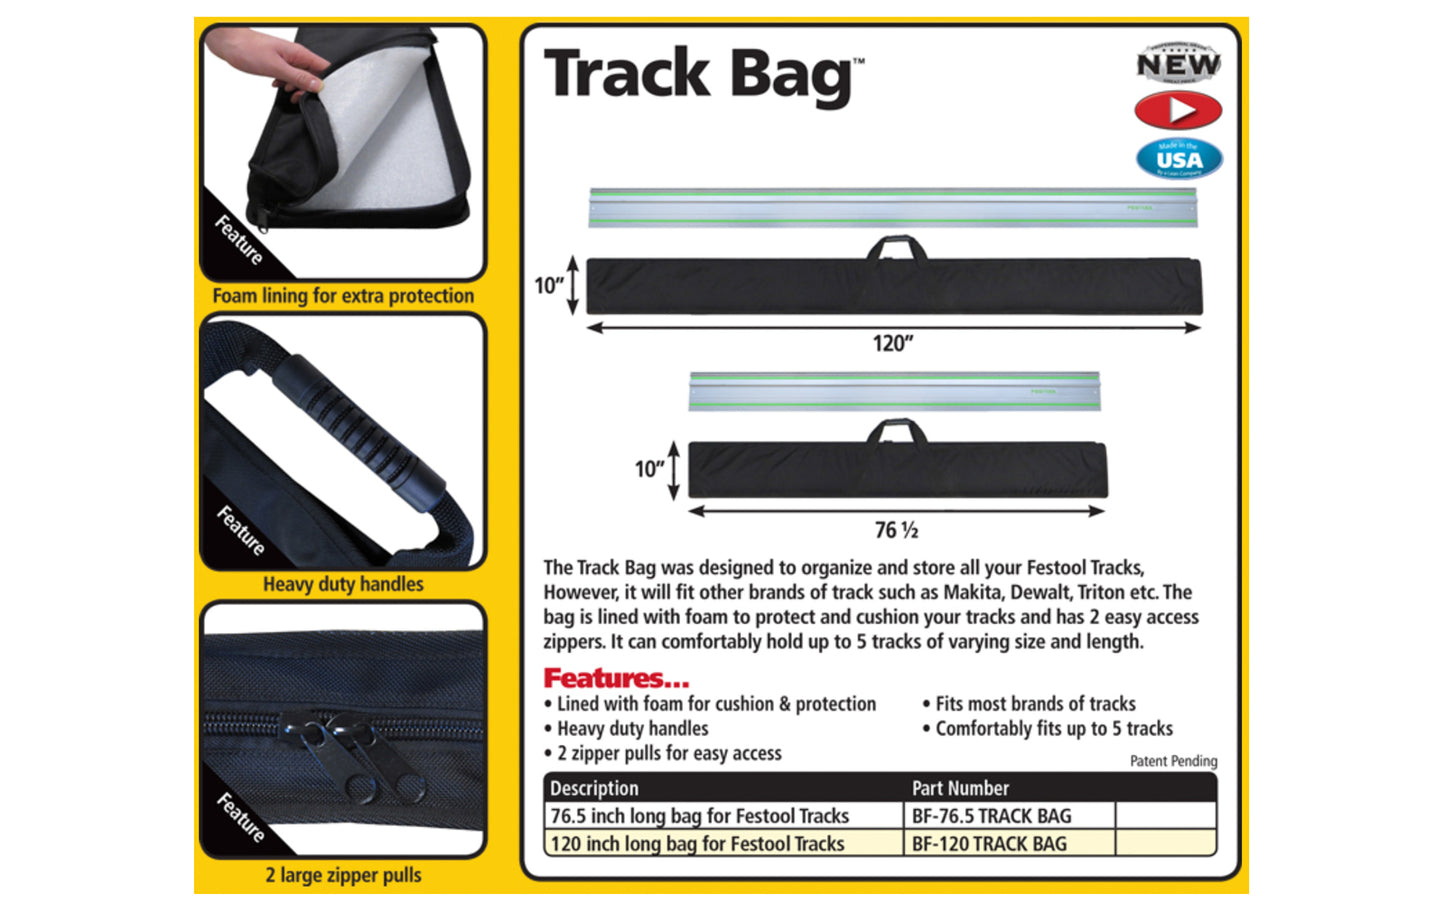 FastCap Track Bag ~ 76-1/2" Length - Model No. BF-76.5 TRACK BAG ~ designed to organize & store all your Festool Tracks, However, it will fit other brands of track such as Makita, Dewalt, Triton etc. - Lined with foam for cushion & protection - Fits 5 tracks